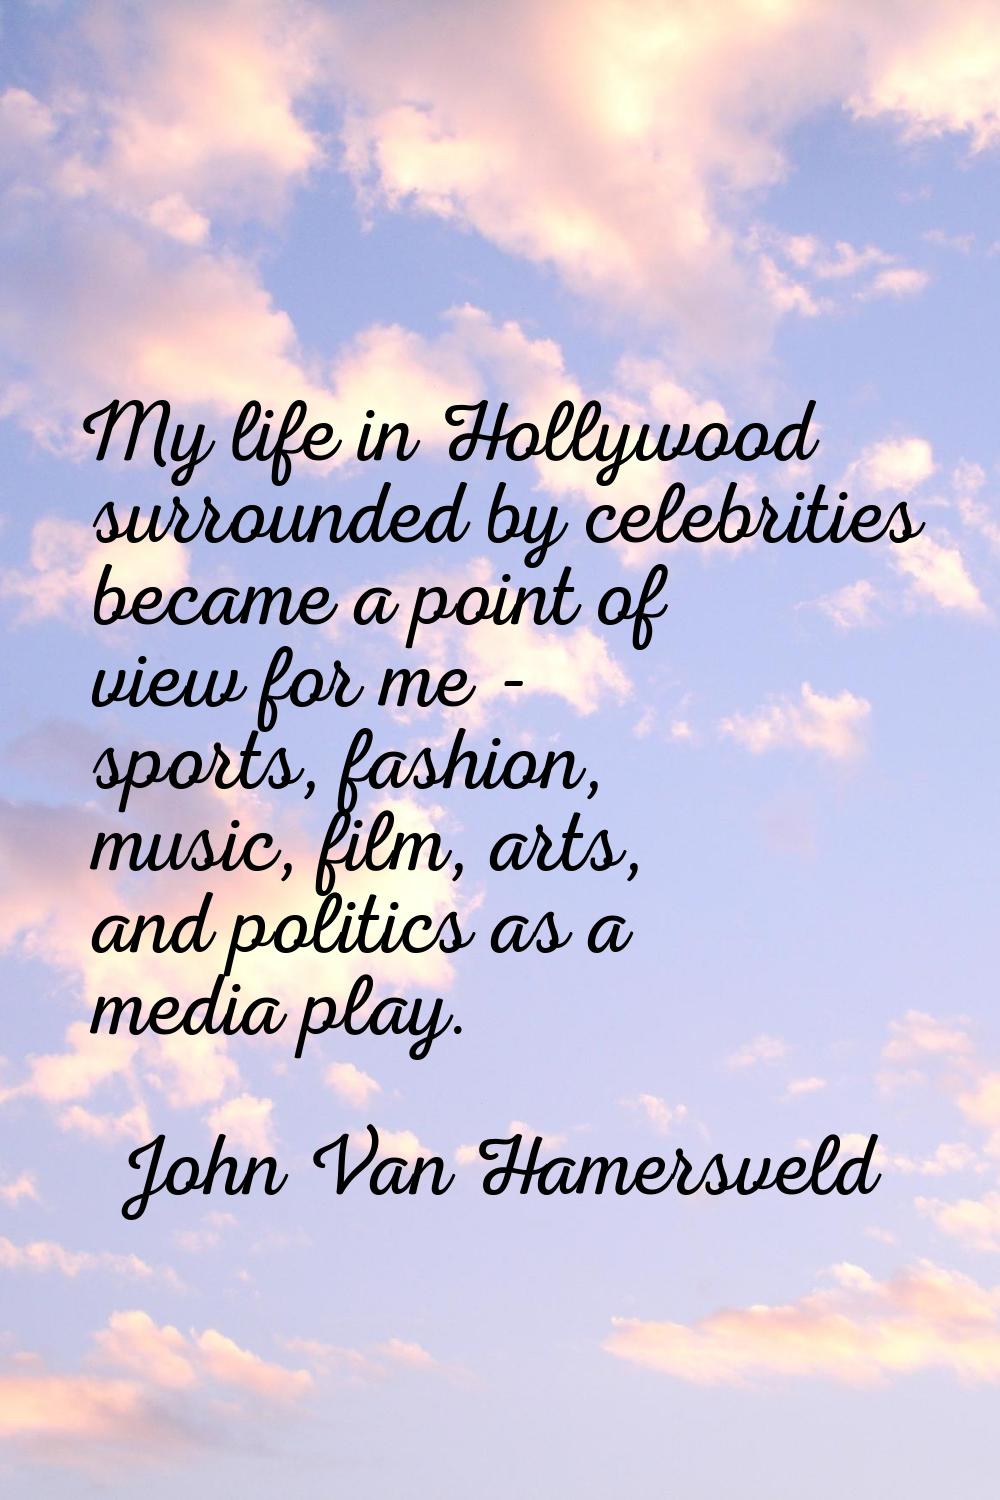 My life in Hollywood surrounded by celebrities became a point of view for me - sports, fashion, mus